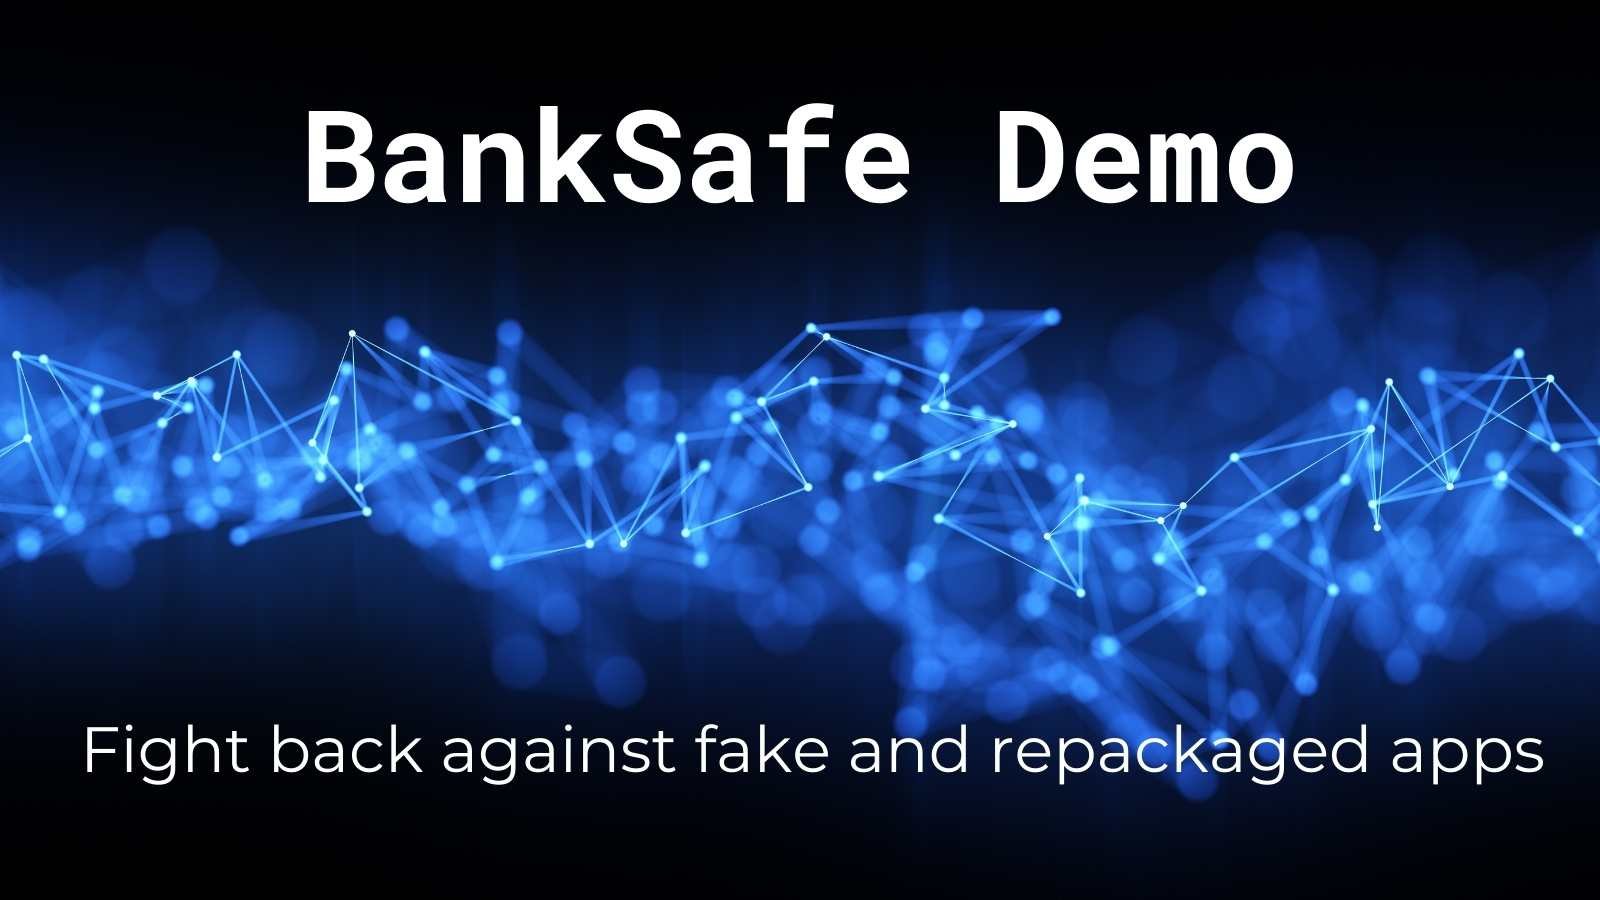 Fintech concept. Futuristic digital blockchain background with text 'BankSafe Demo Fight back against fake and repackaged apps.